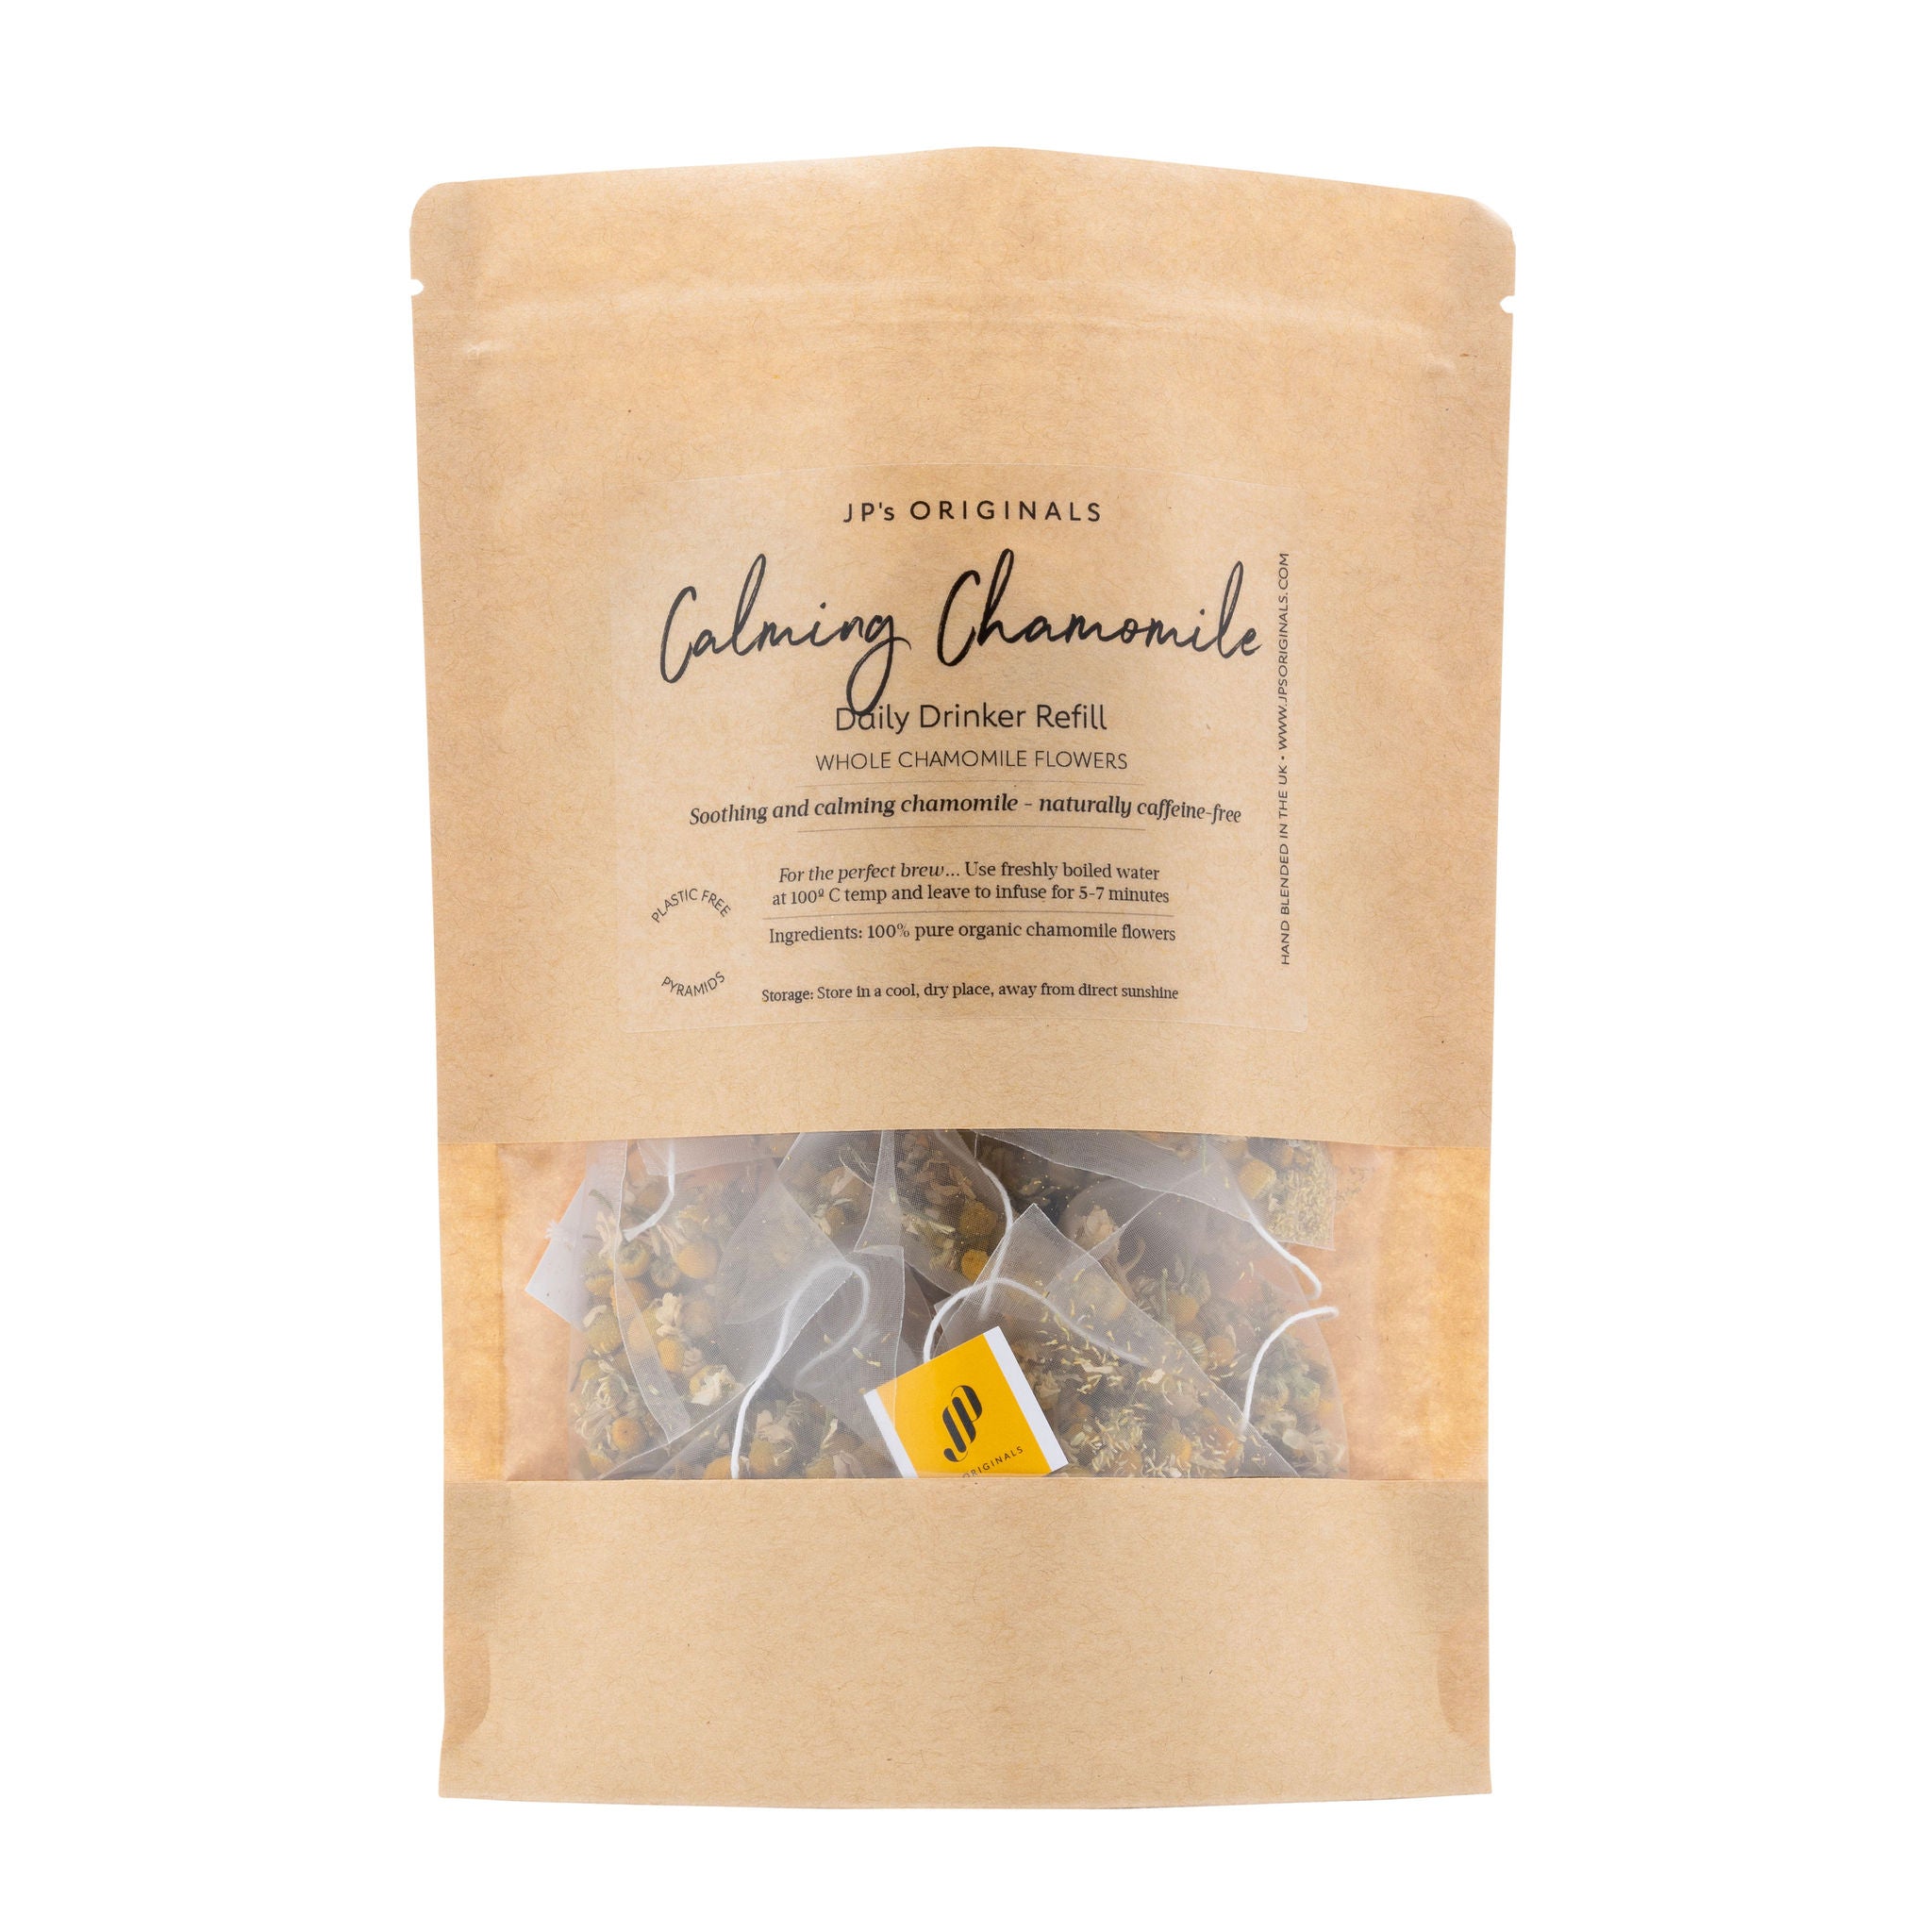 CALMING CHAMOMILE - DAILY DRINKER REFILL